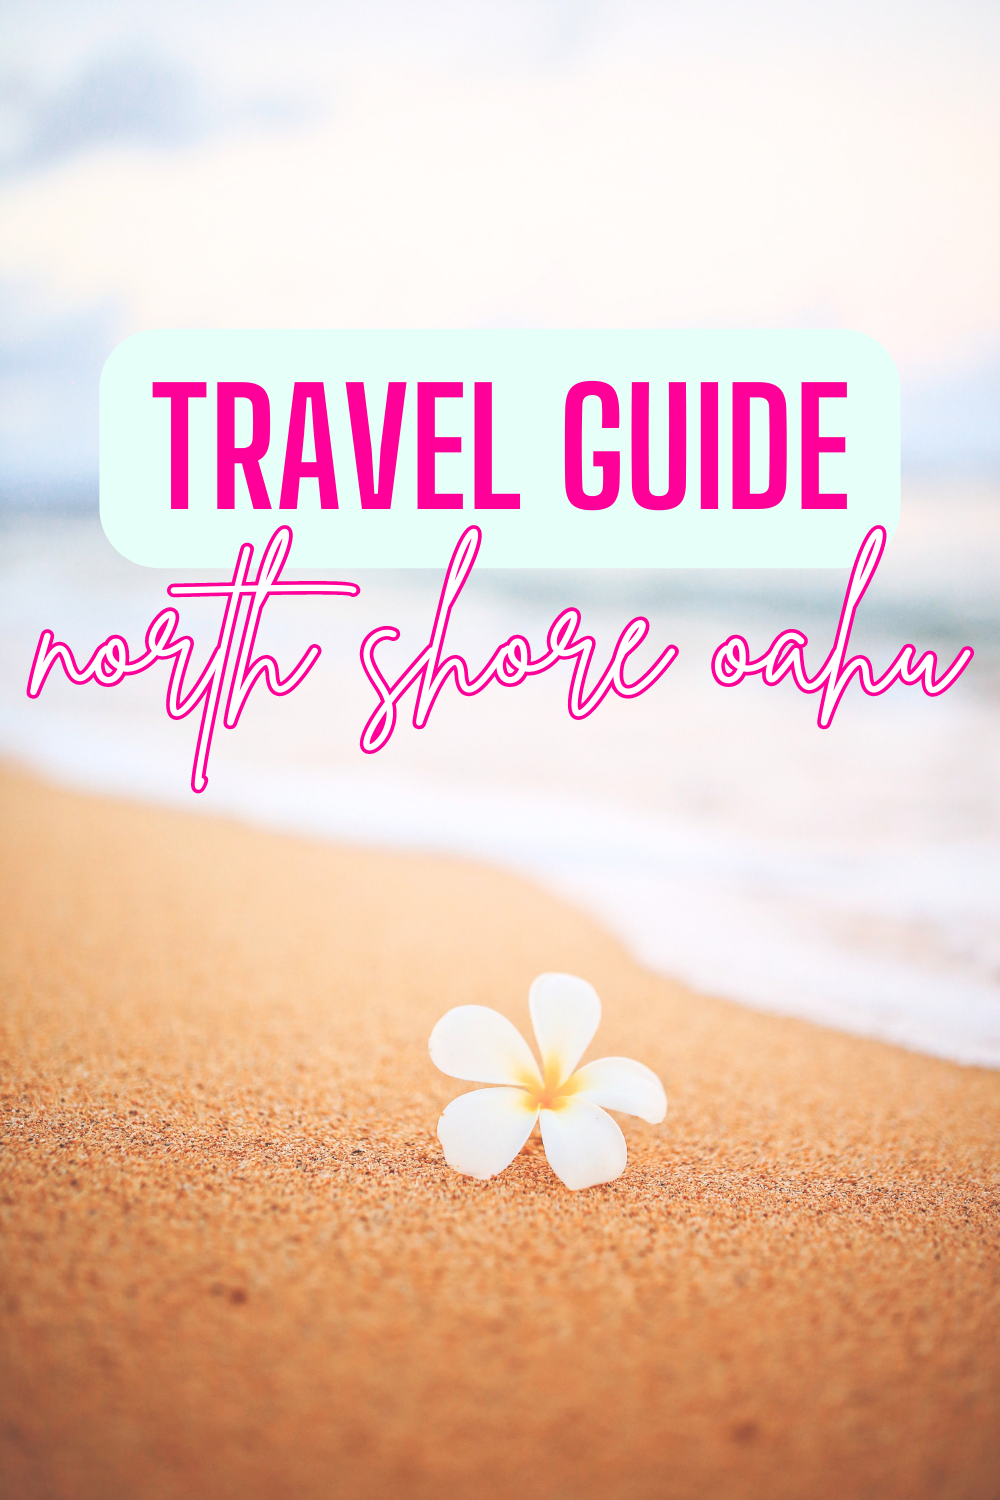 North Short Oahu Travel Guide